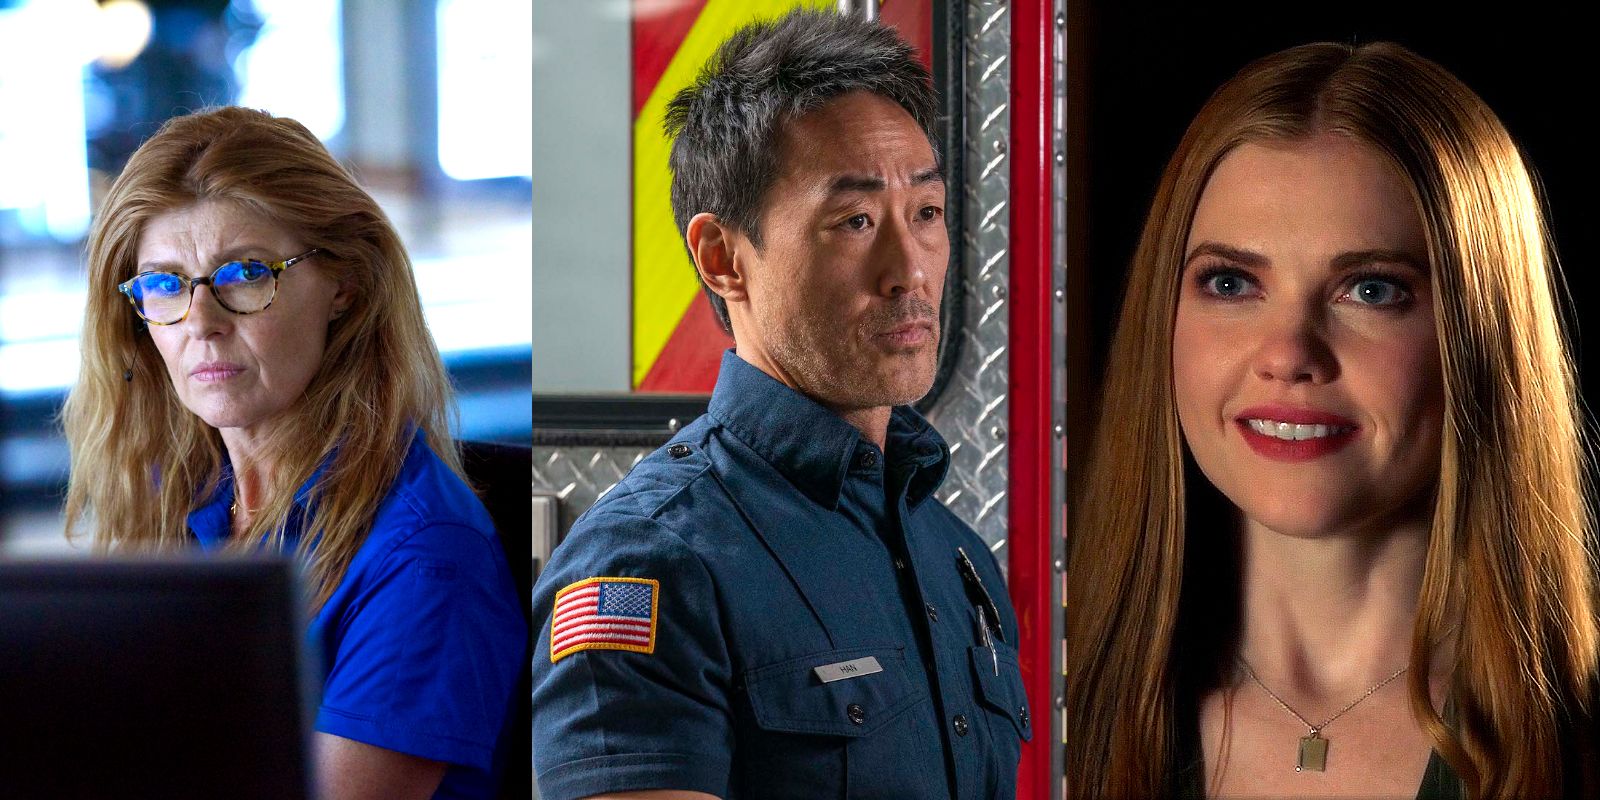 Split image: Abby at the call center, Chimney by a fire truck, and Taylor smiling in 9-1-1.